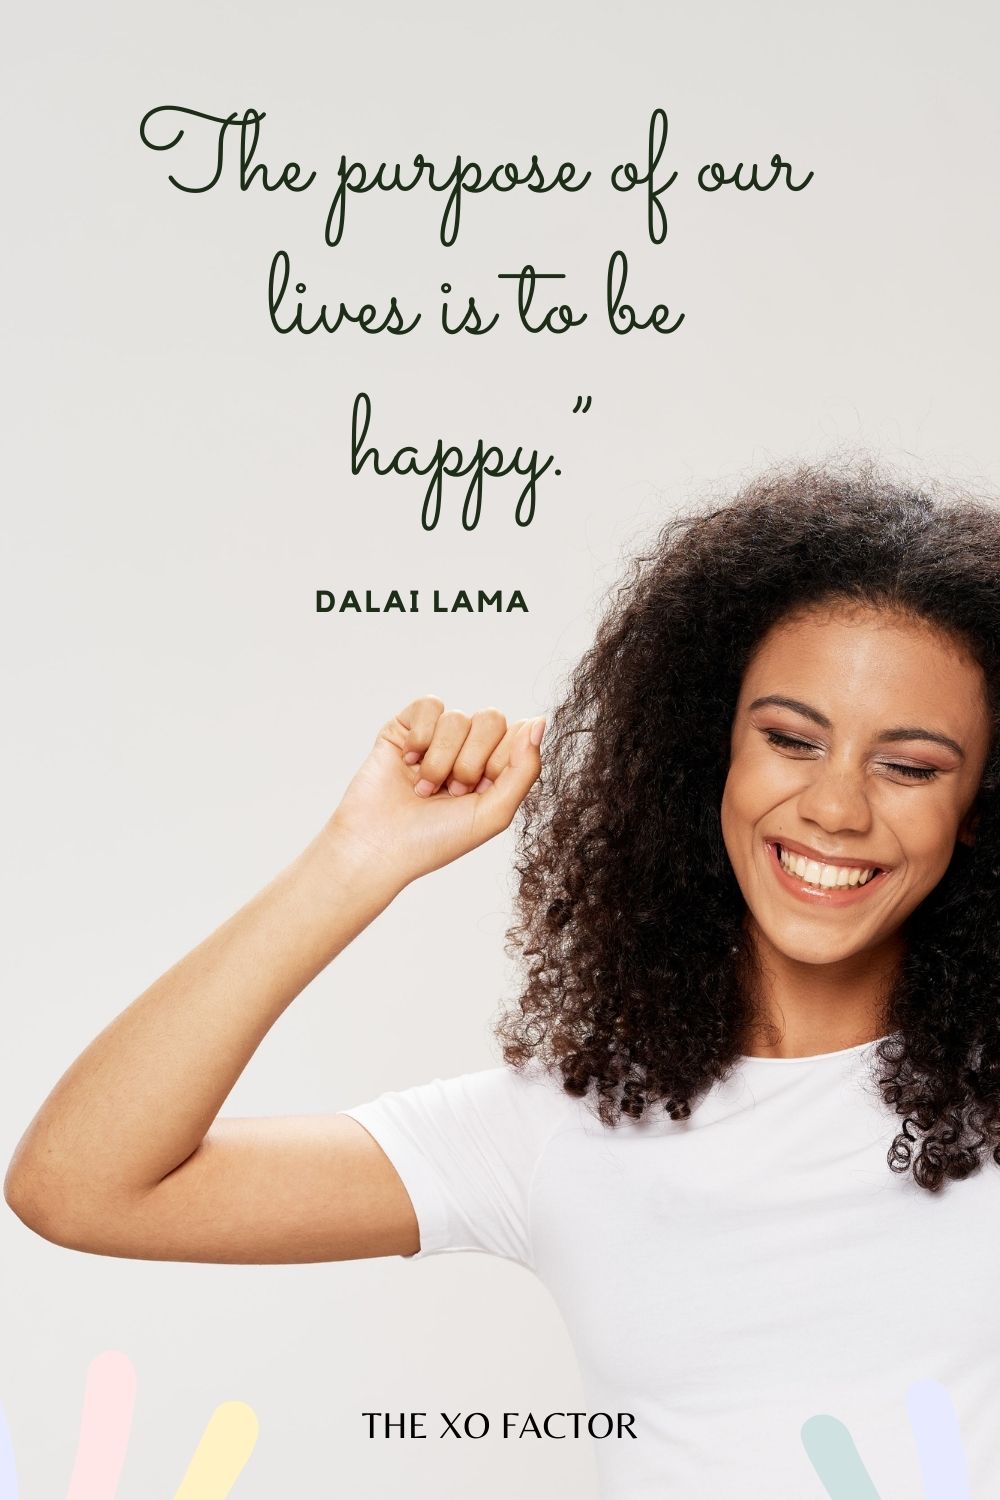 The purpose of our lives is to be happy.” Dalai Lama